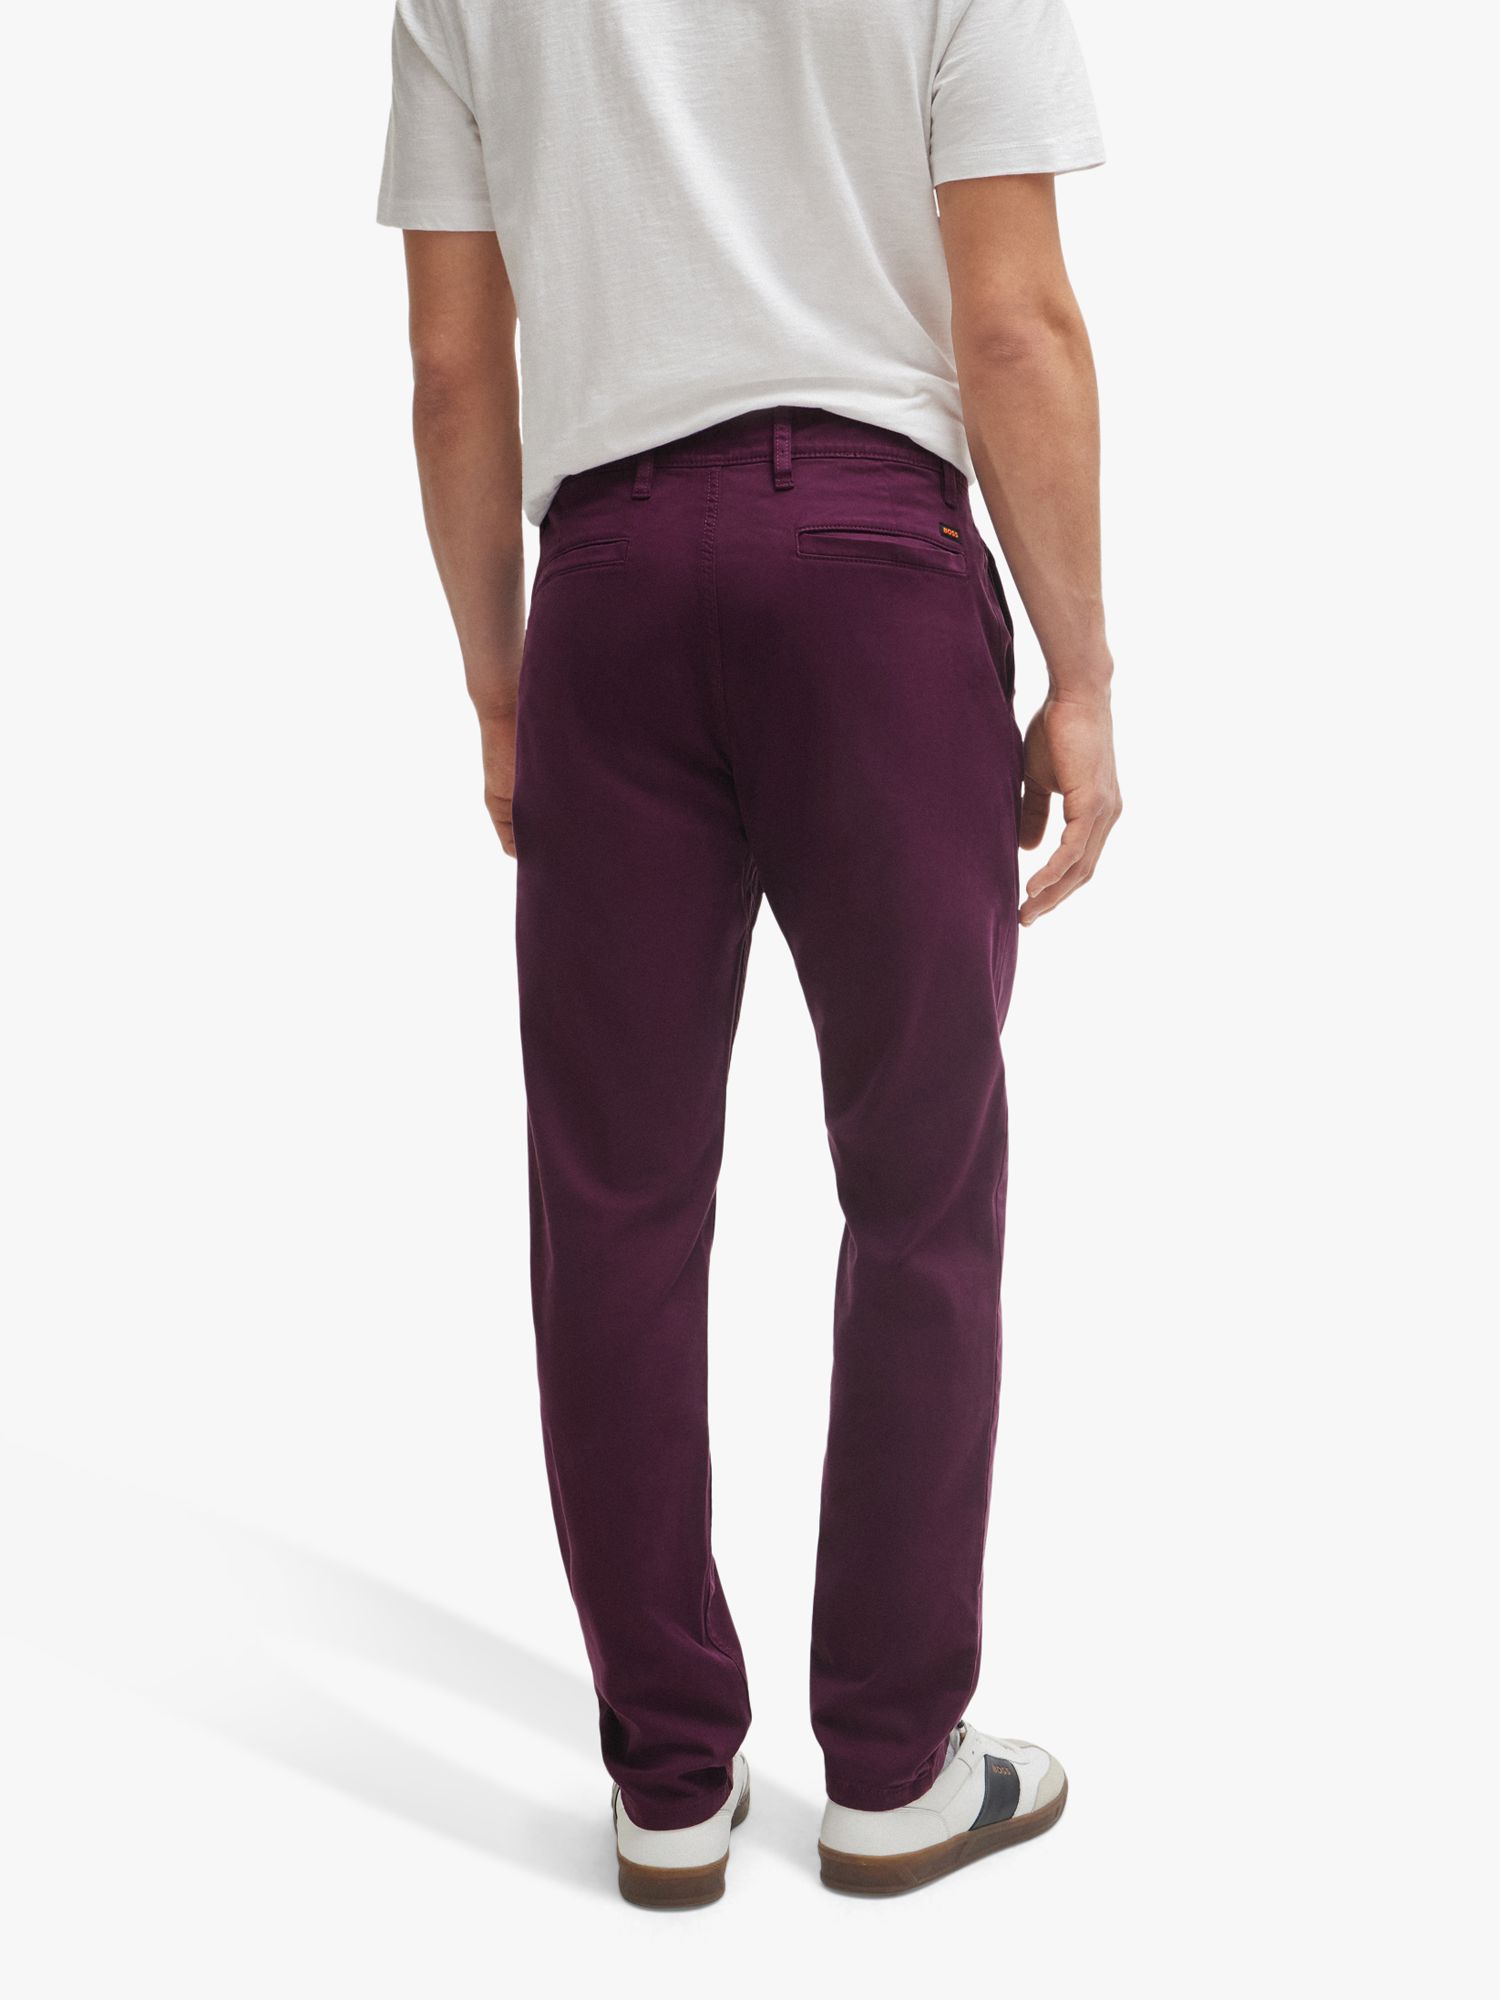 Buy BOSS Cotton Tapered Chinos Online at johnlewis.com